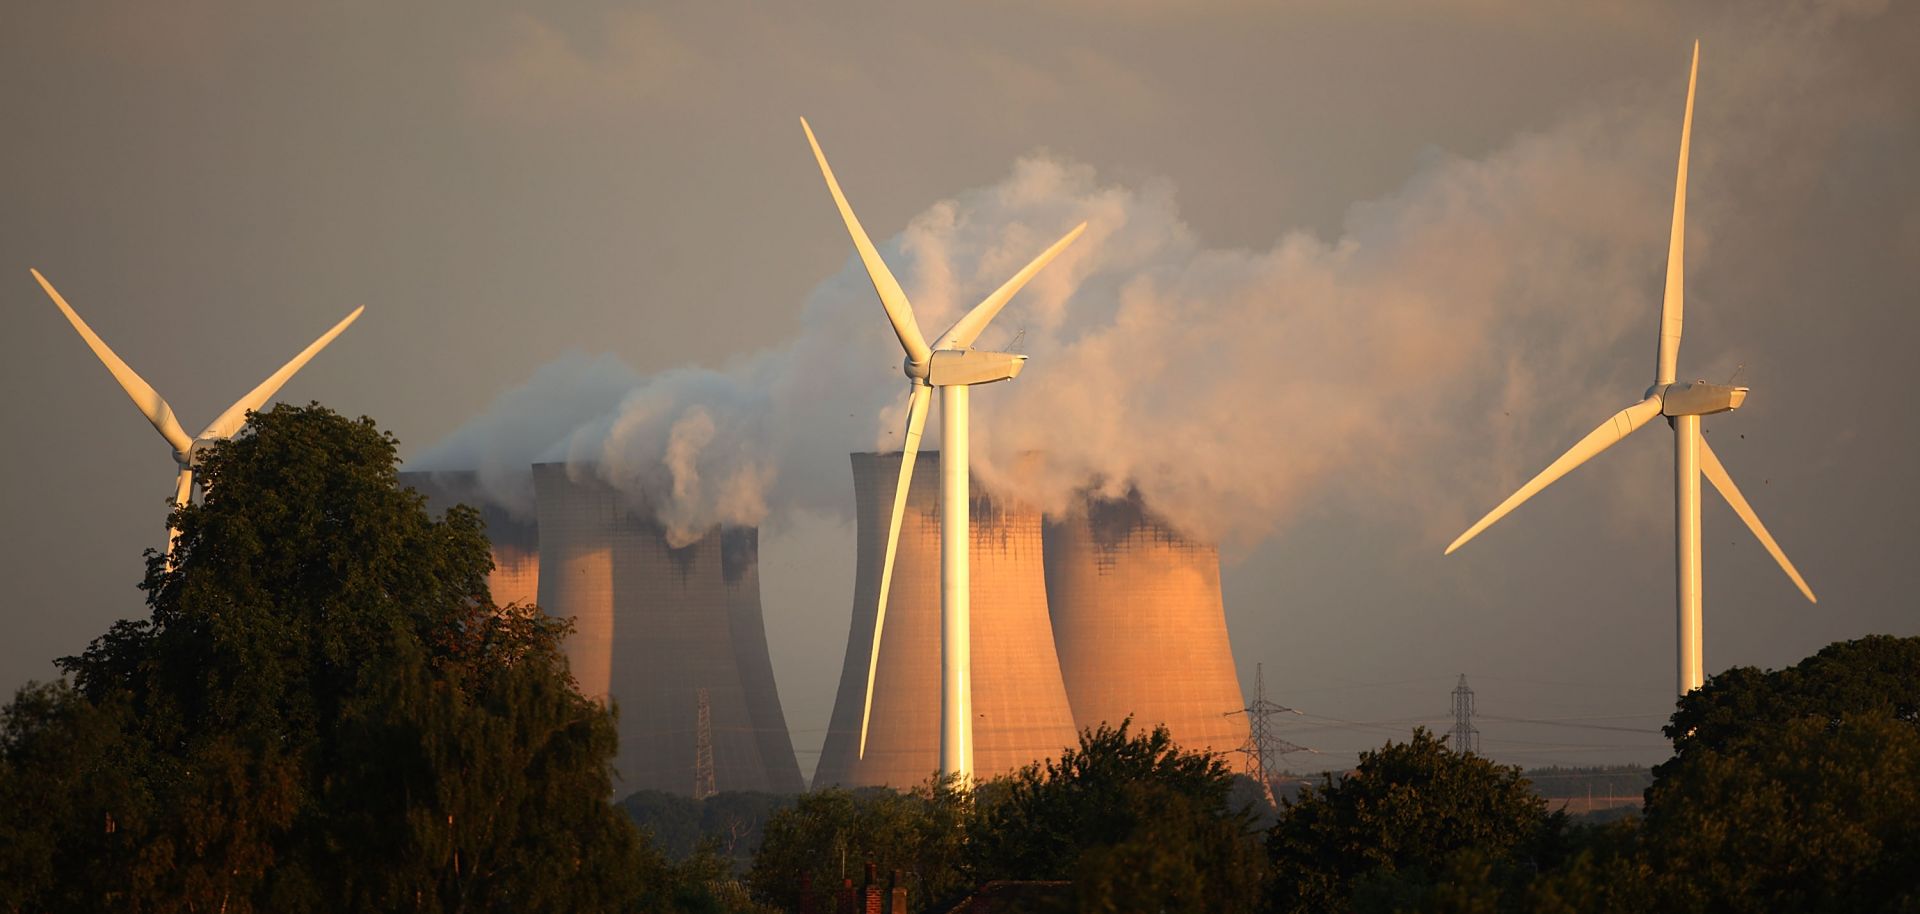 Wind turbines spin alongside the Drax power station, the biggest coal-fired plant in Europe.